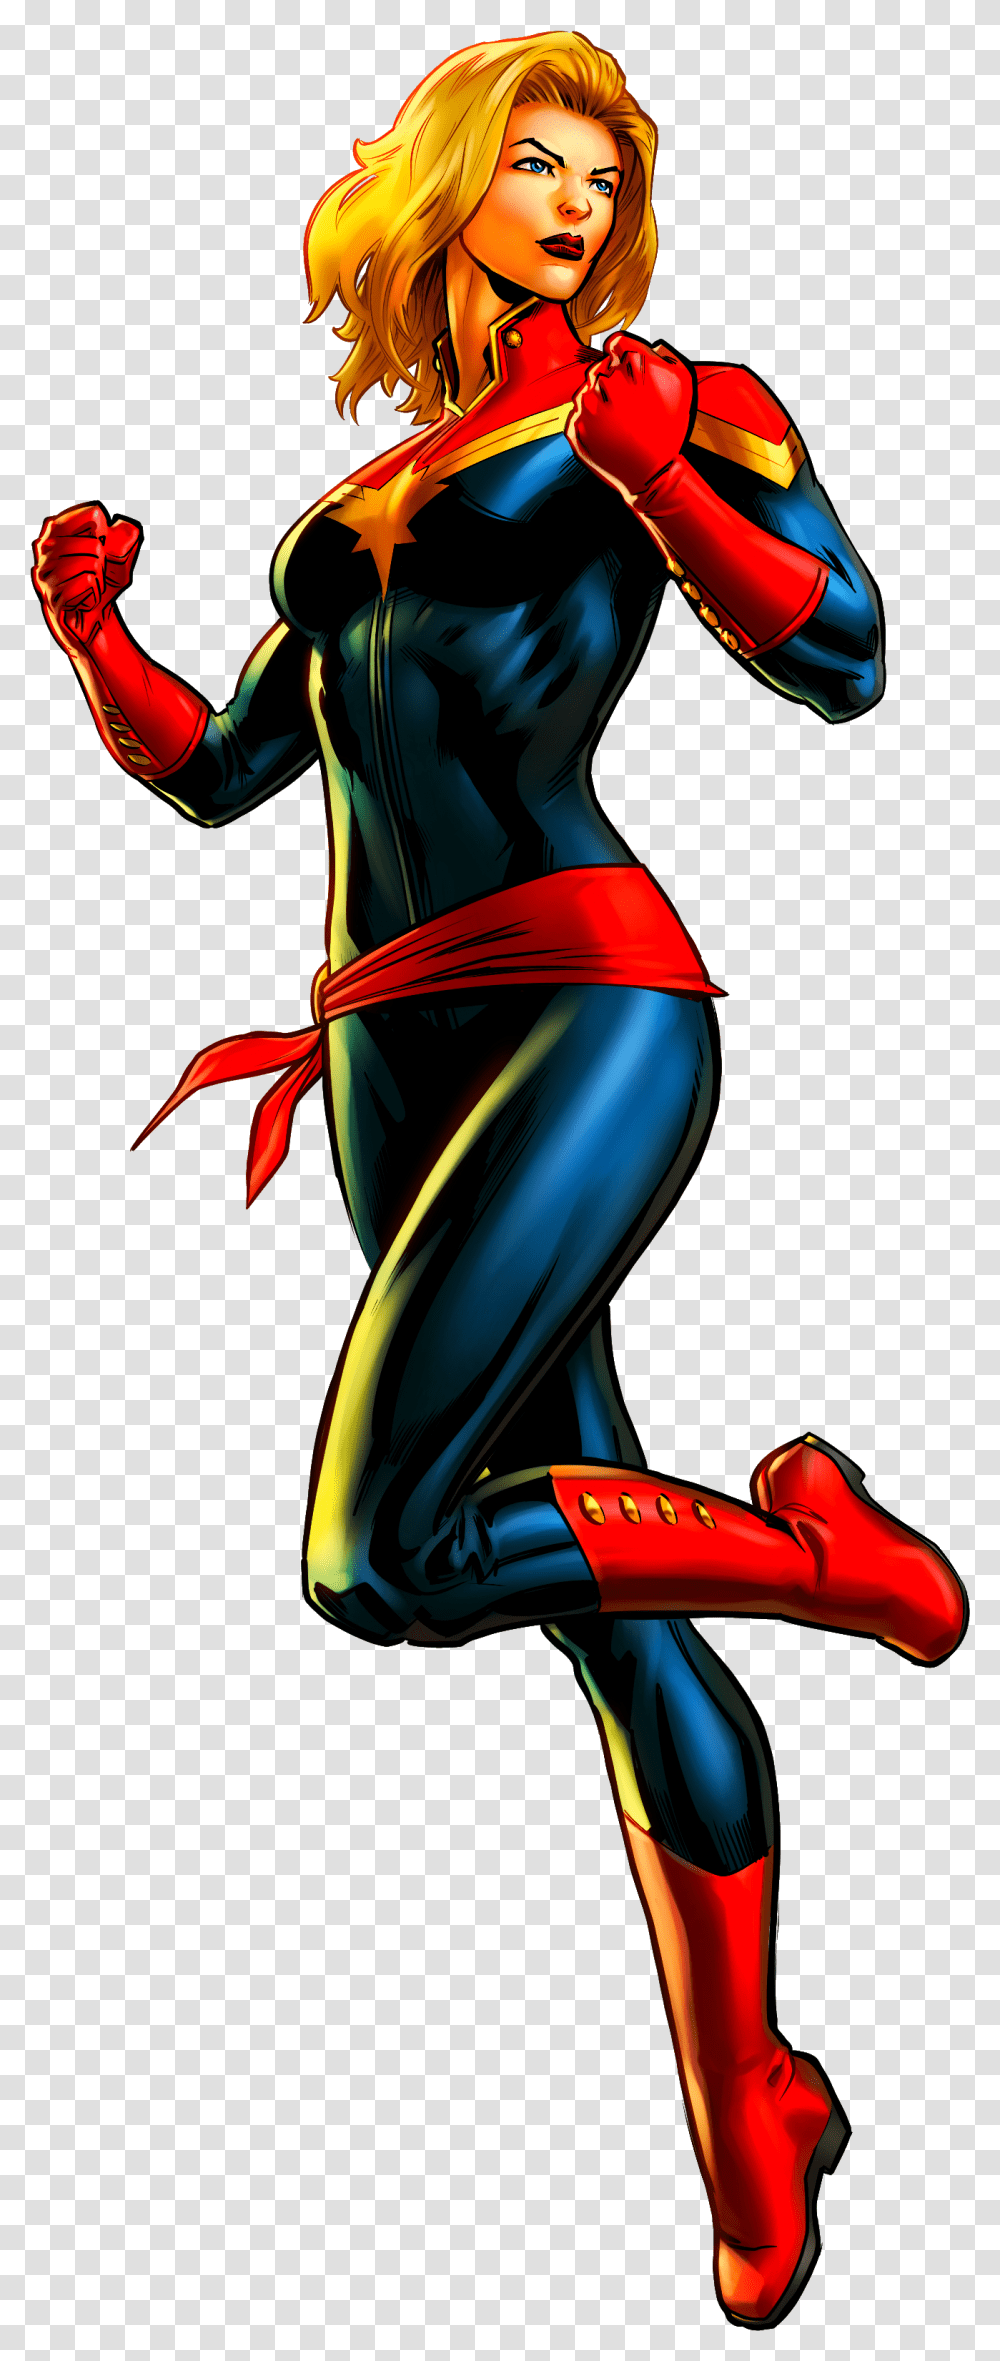 Image Result For Captain Marvel Captain Marvel Comic Character, Person, Performer, Dance Pose, Leisure Activities Transparent Png